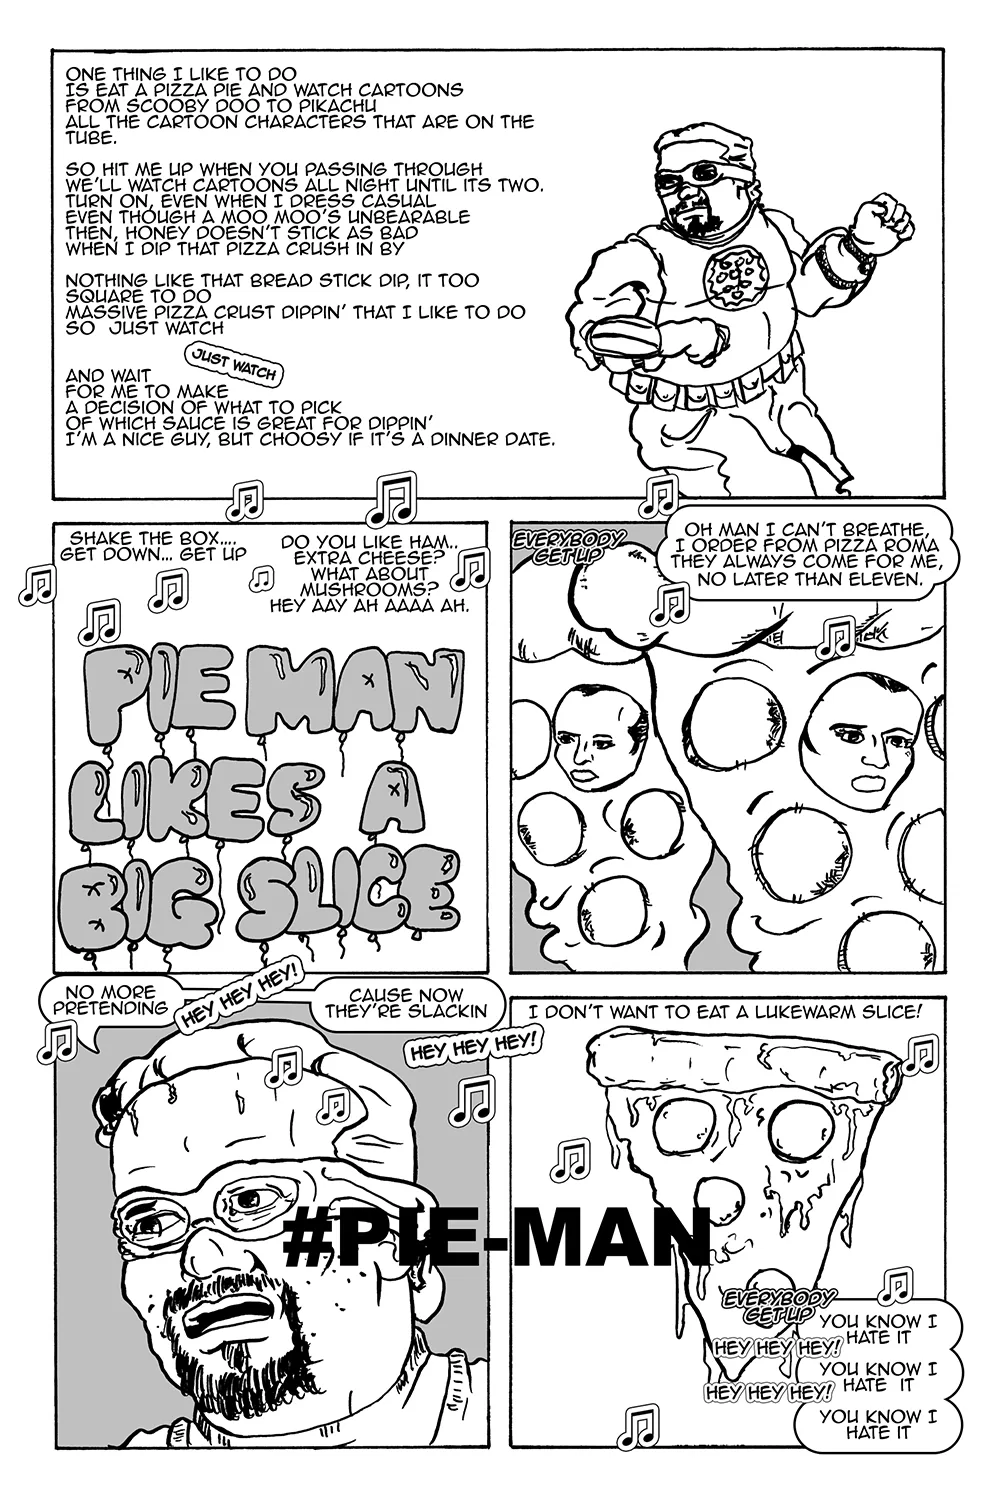 Pie-Man sings about his favorite food… Pizza.